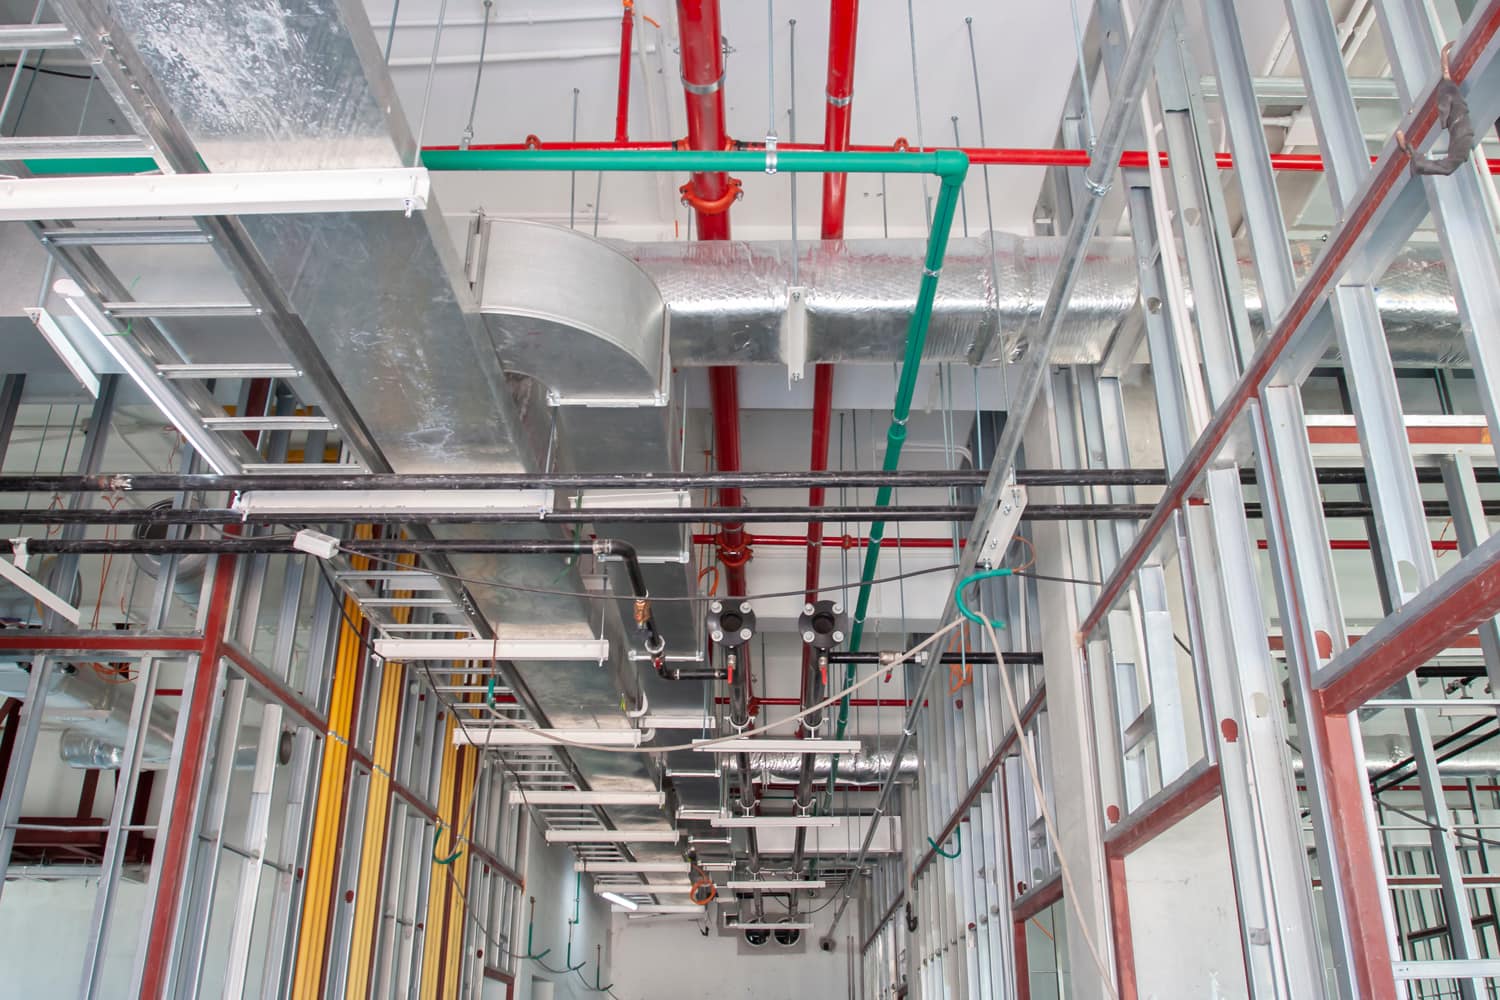 Typical installation of ducting with fiberglass insulation work combine with cable tray and fire fighting pipe